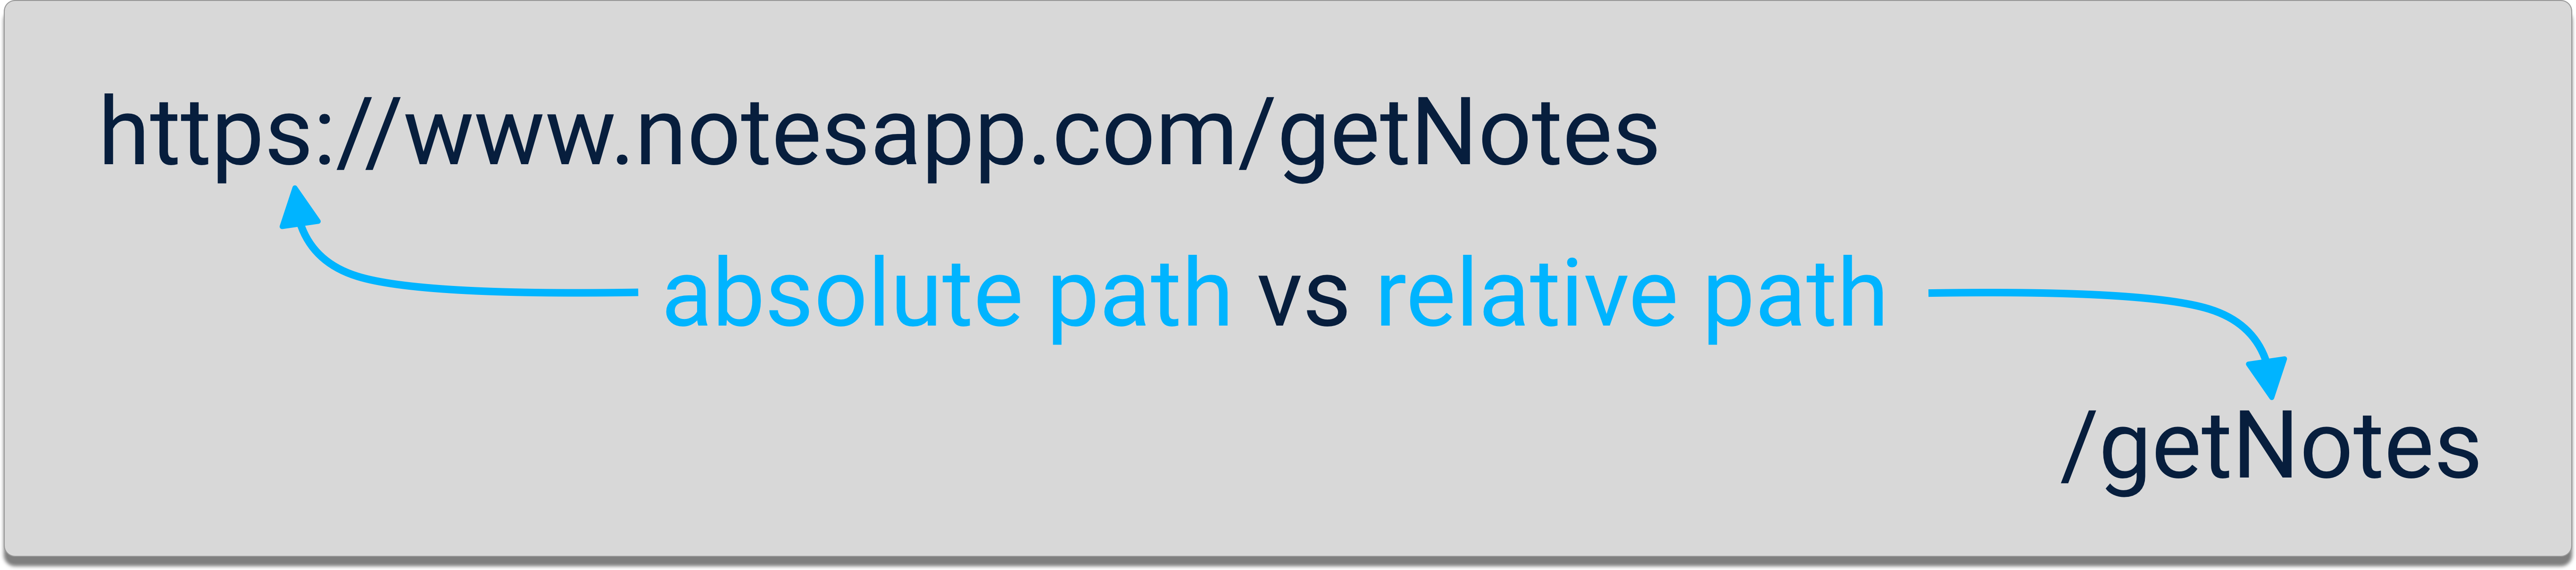 Relative vs absolute paths